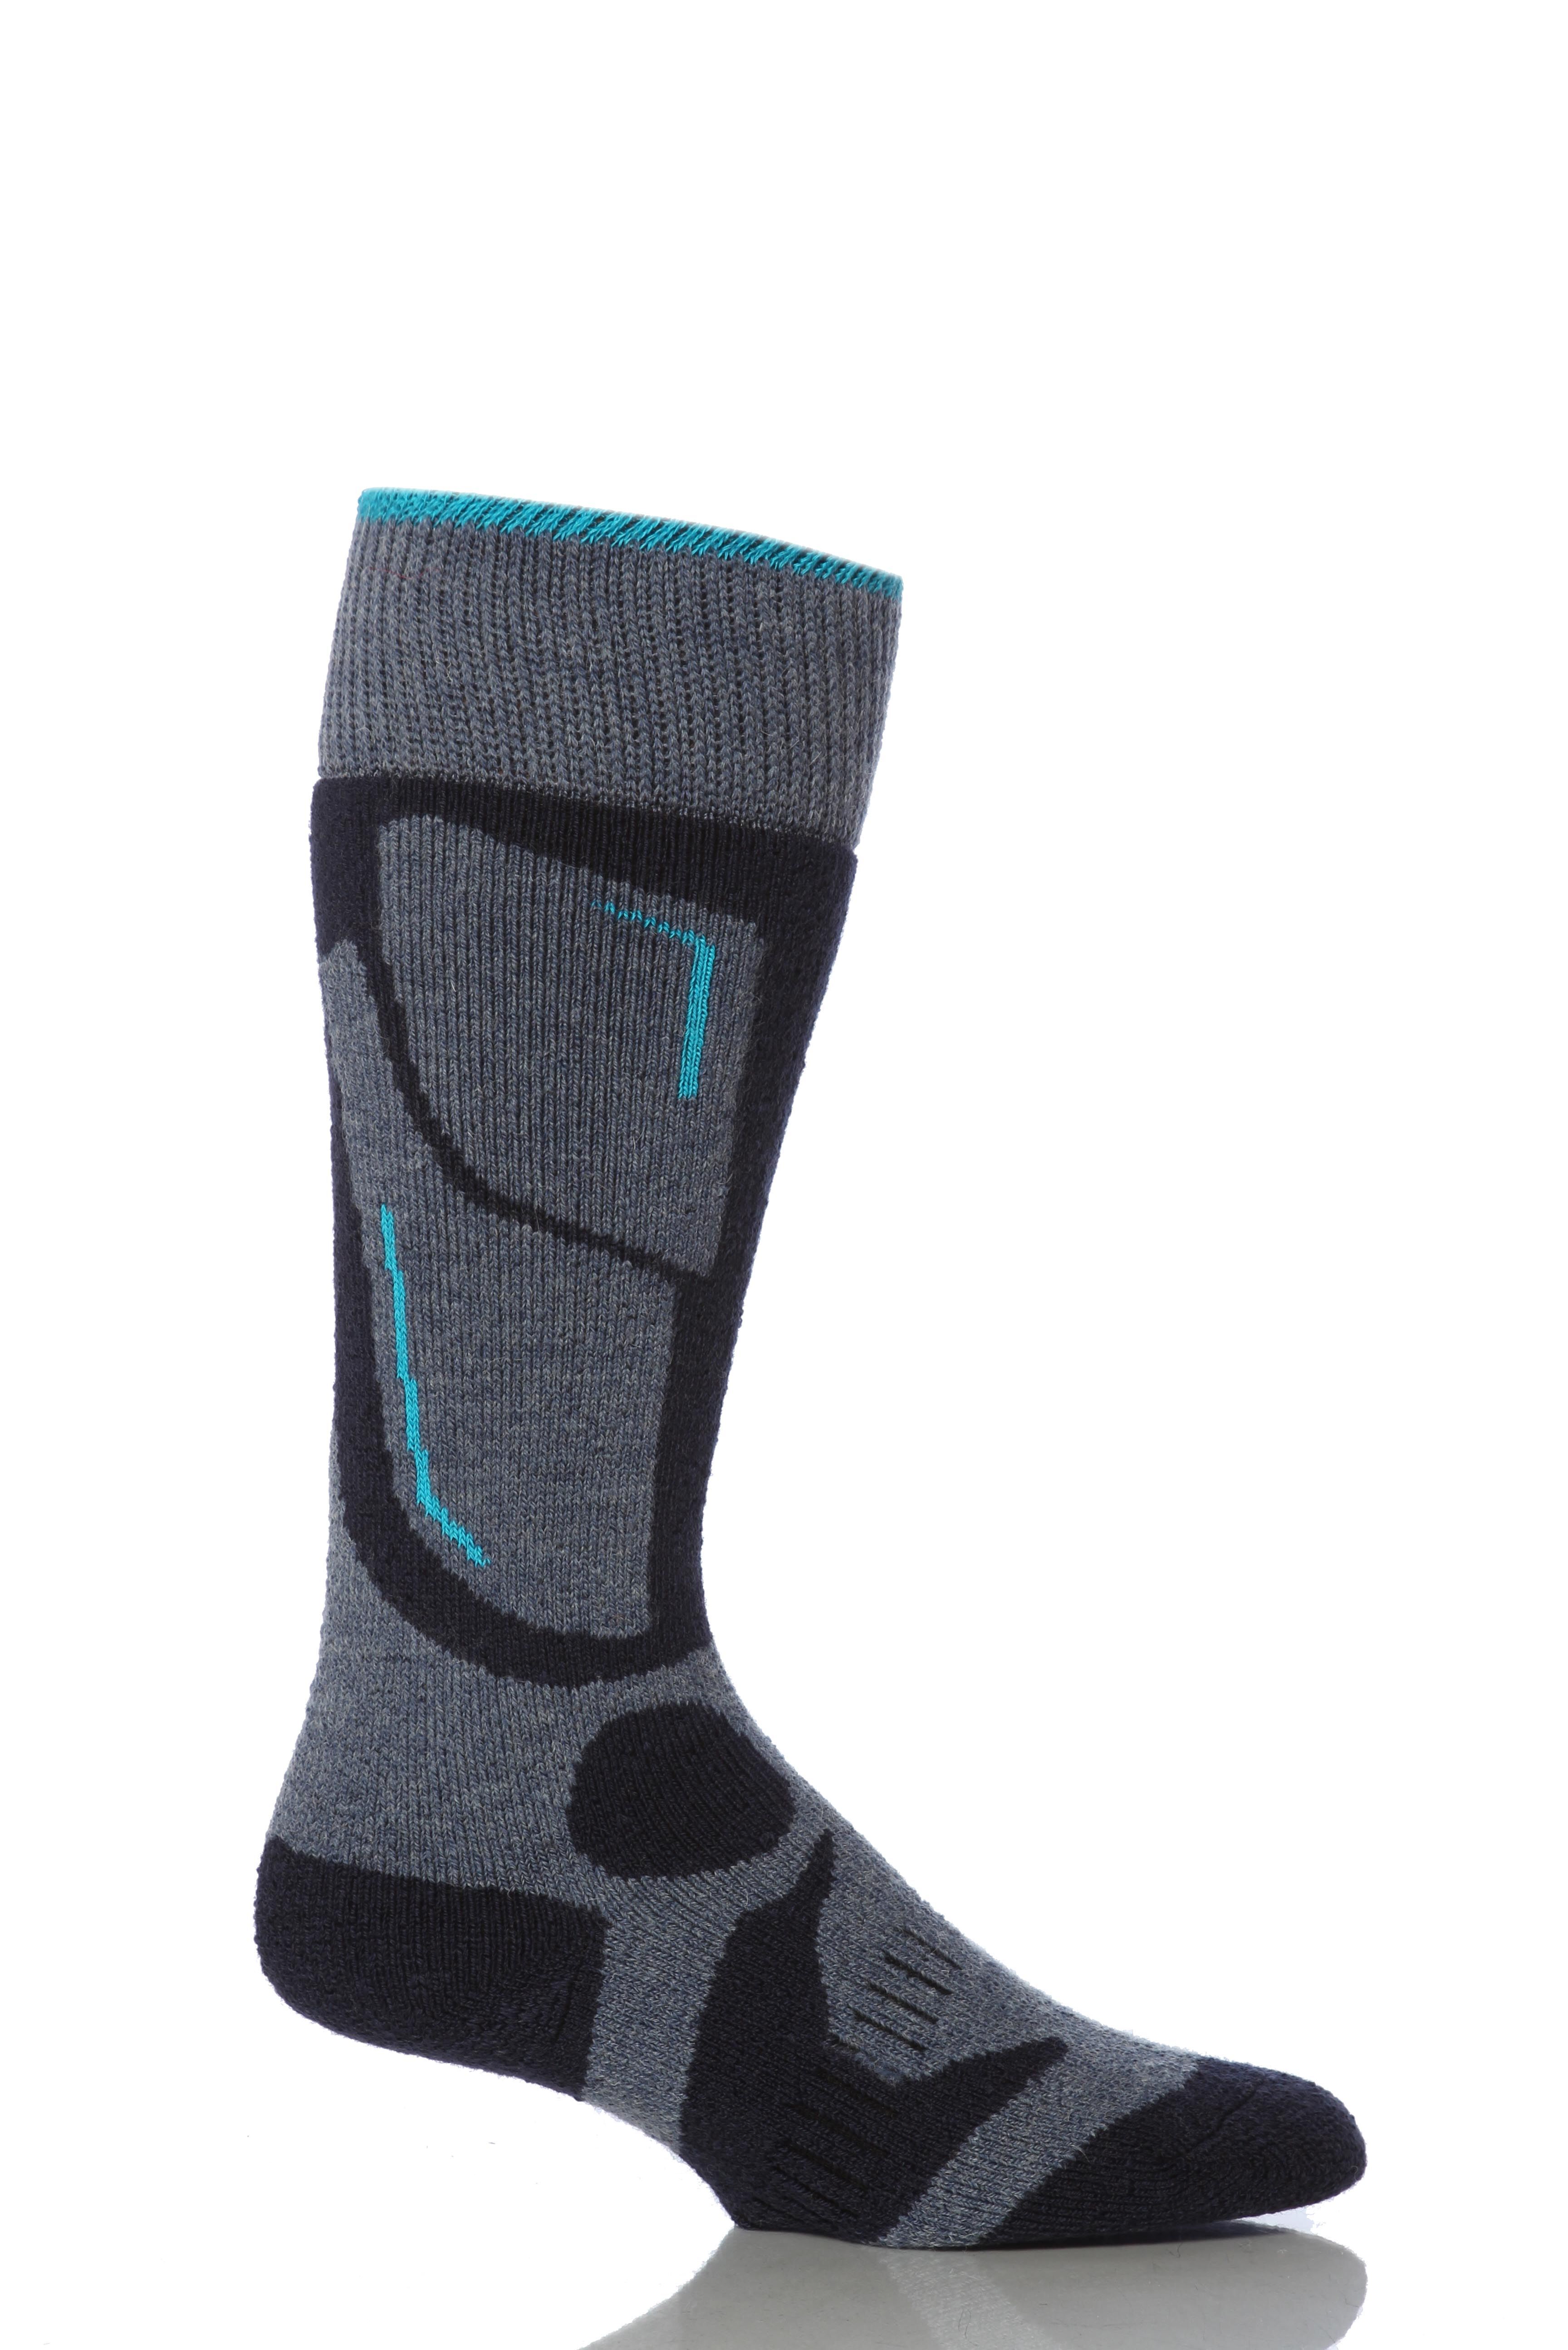 Mens 1 Pair Ben Fogle Expedition Heavy Weight Wool Hiking Socks In 2 ...